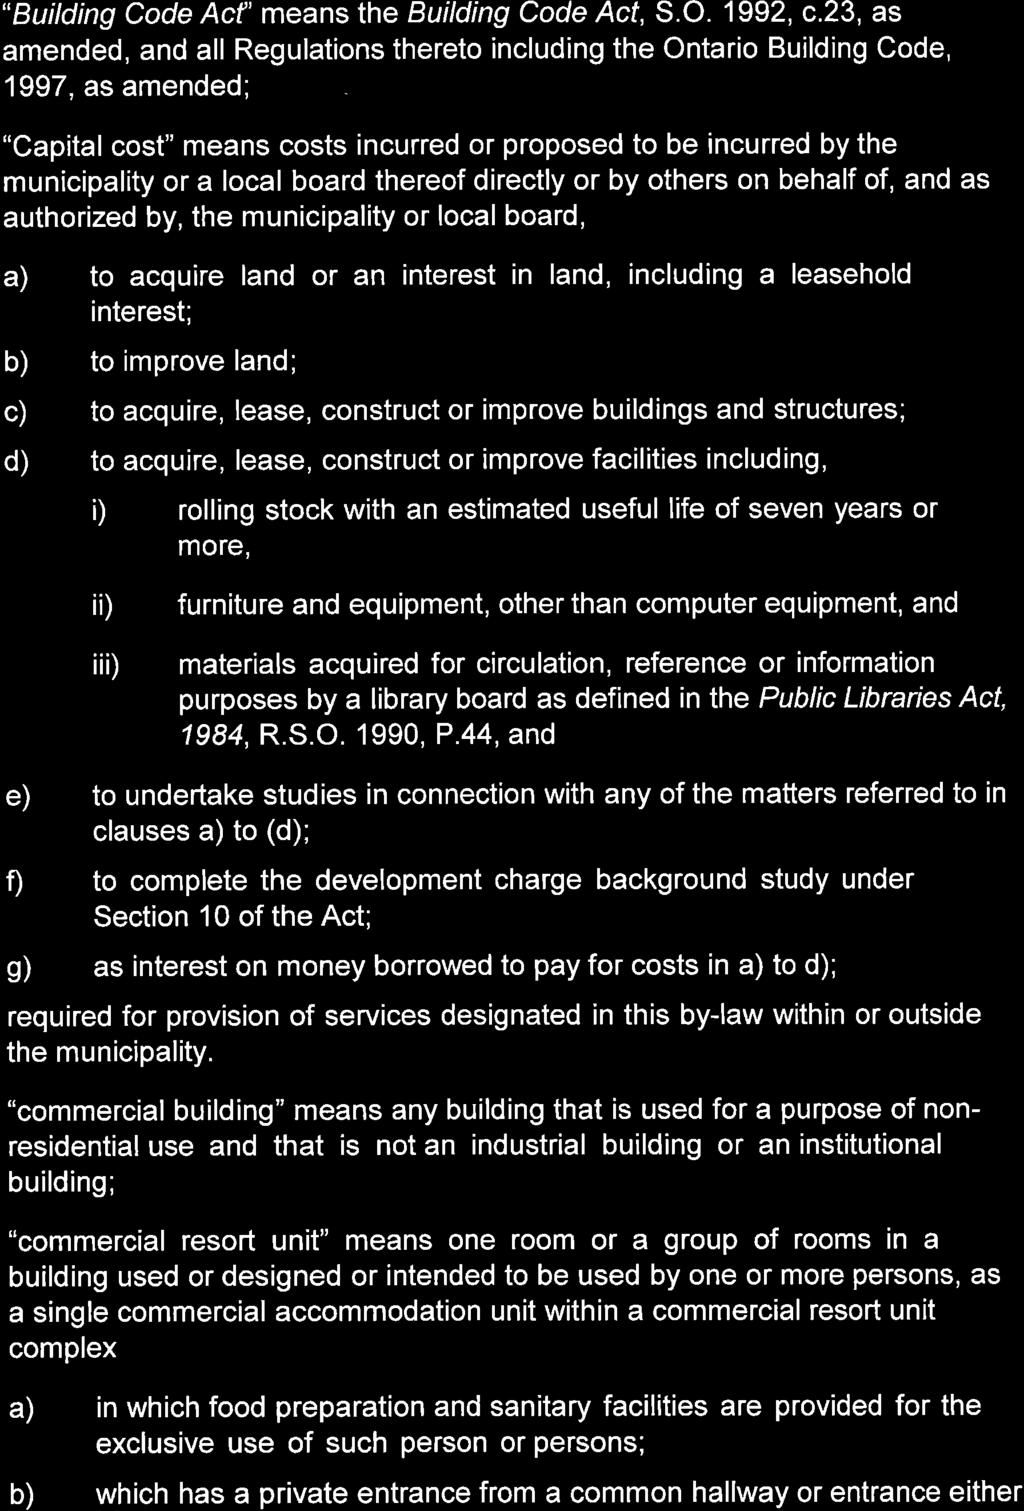 "Building Code Acf'means the Building Code Acf, S.O. 1992, c.